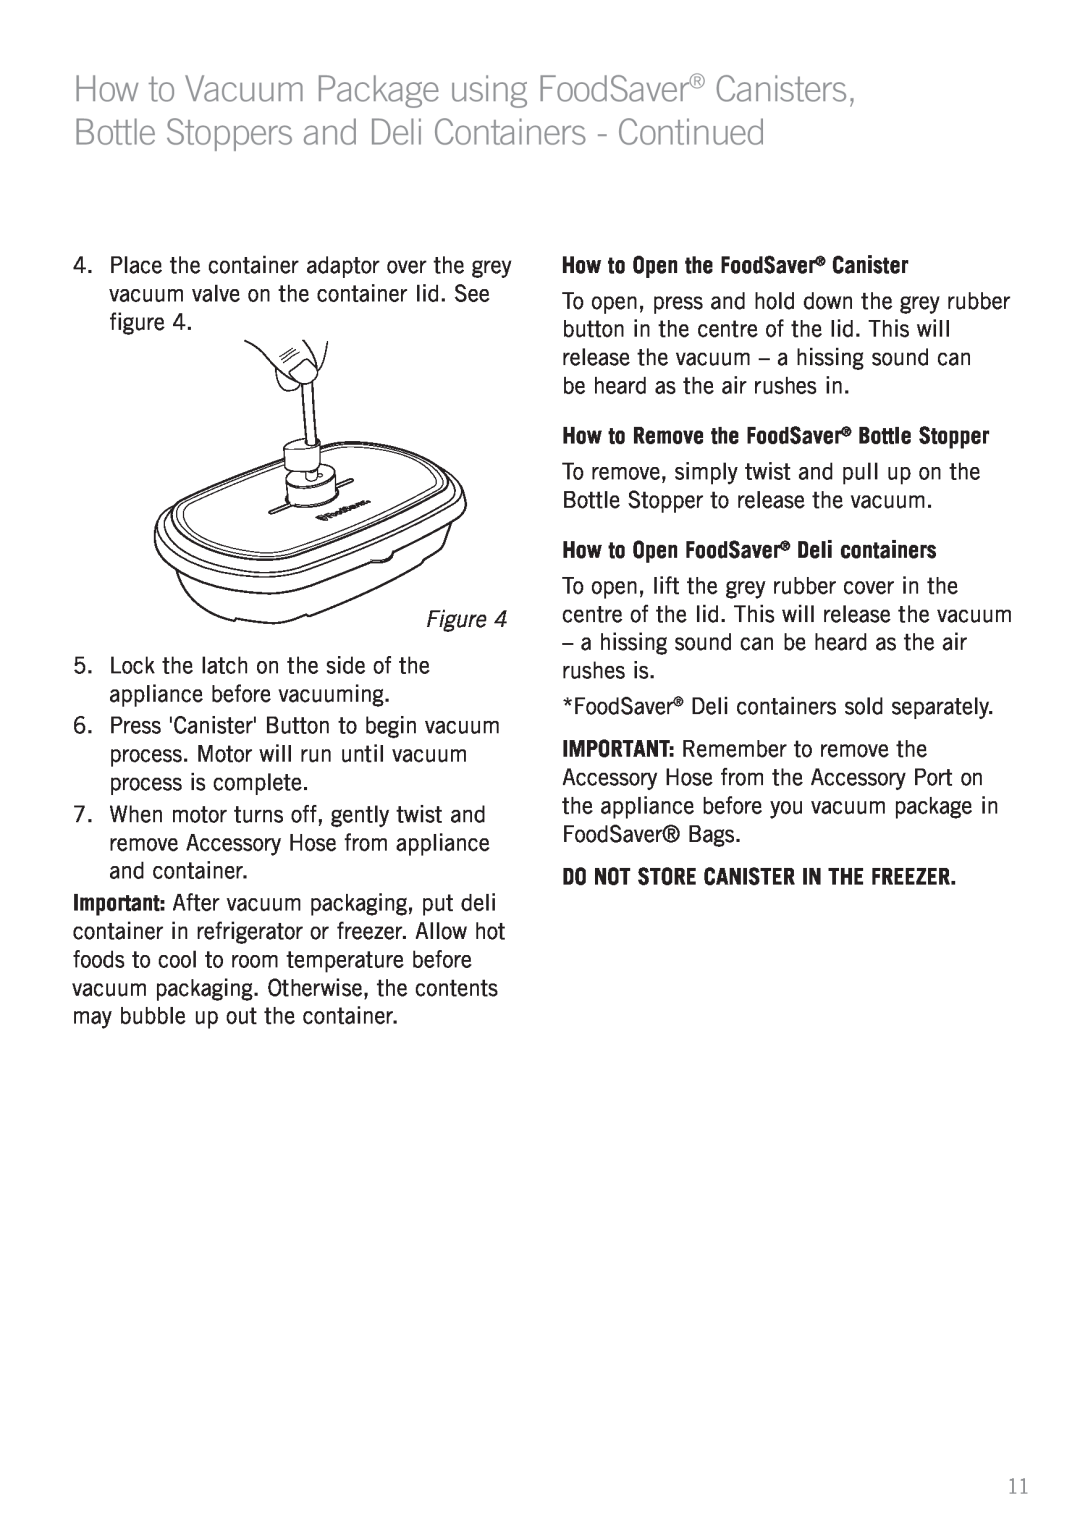 Sunbeam VS6600, VAC660 manual How to Open the FoodSaver Canister, How to Remove the FoodSaver Bottle Stopper 